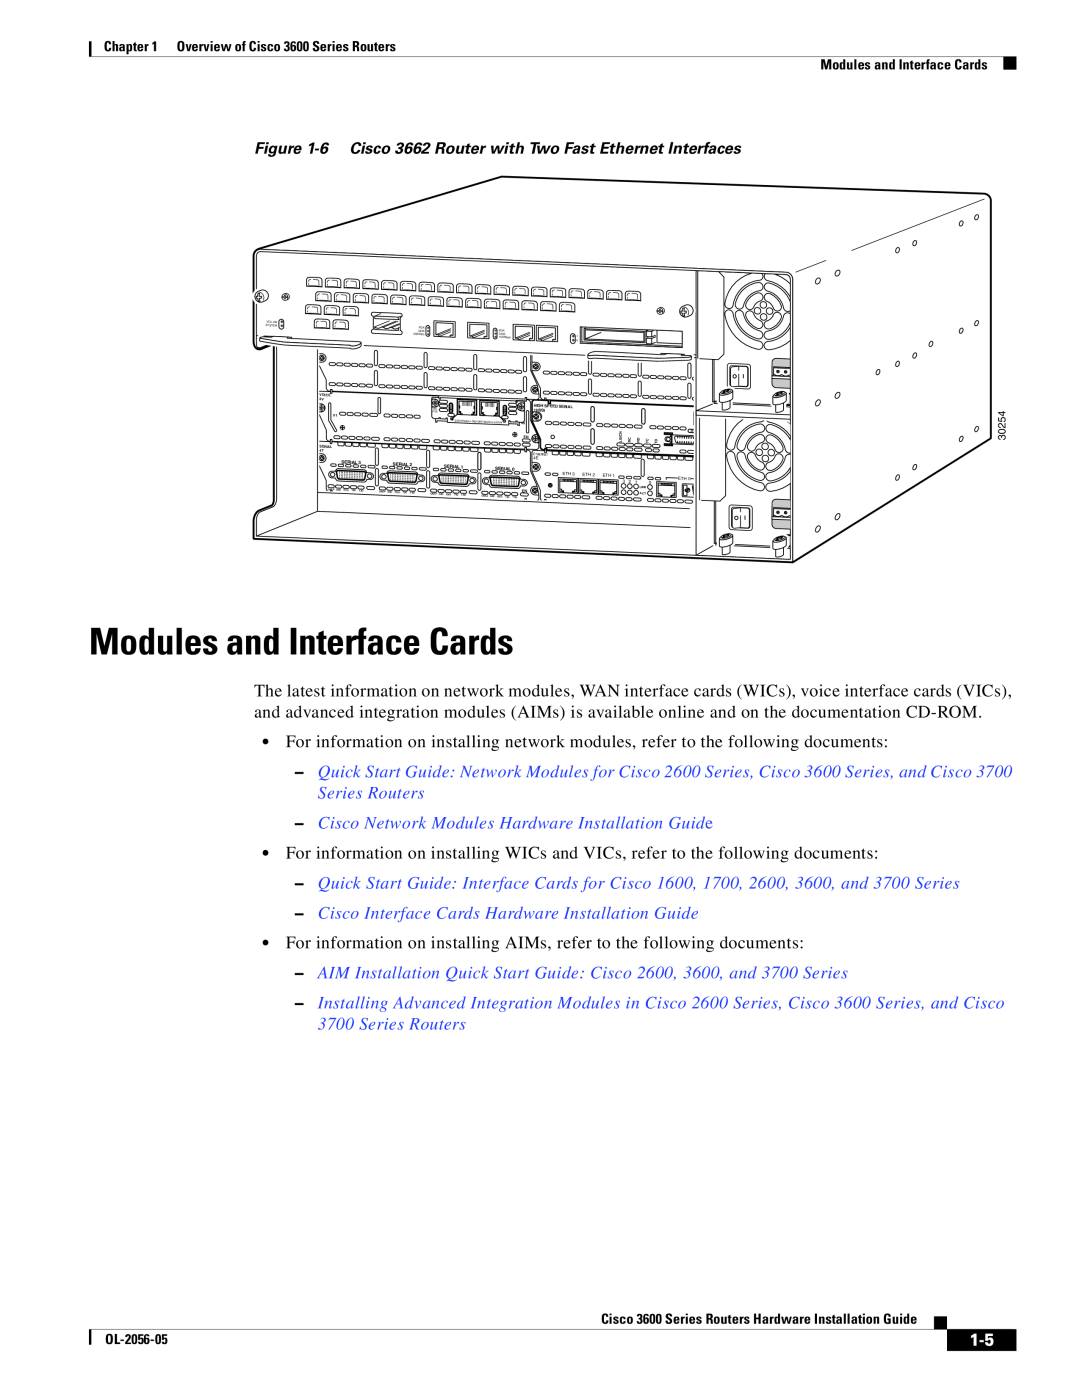 Cisco Systems 3600 specifications Modules and Interface Cards, Cisco Network Modules Hardware Installation Guide 